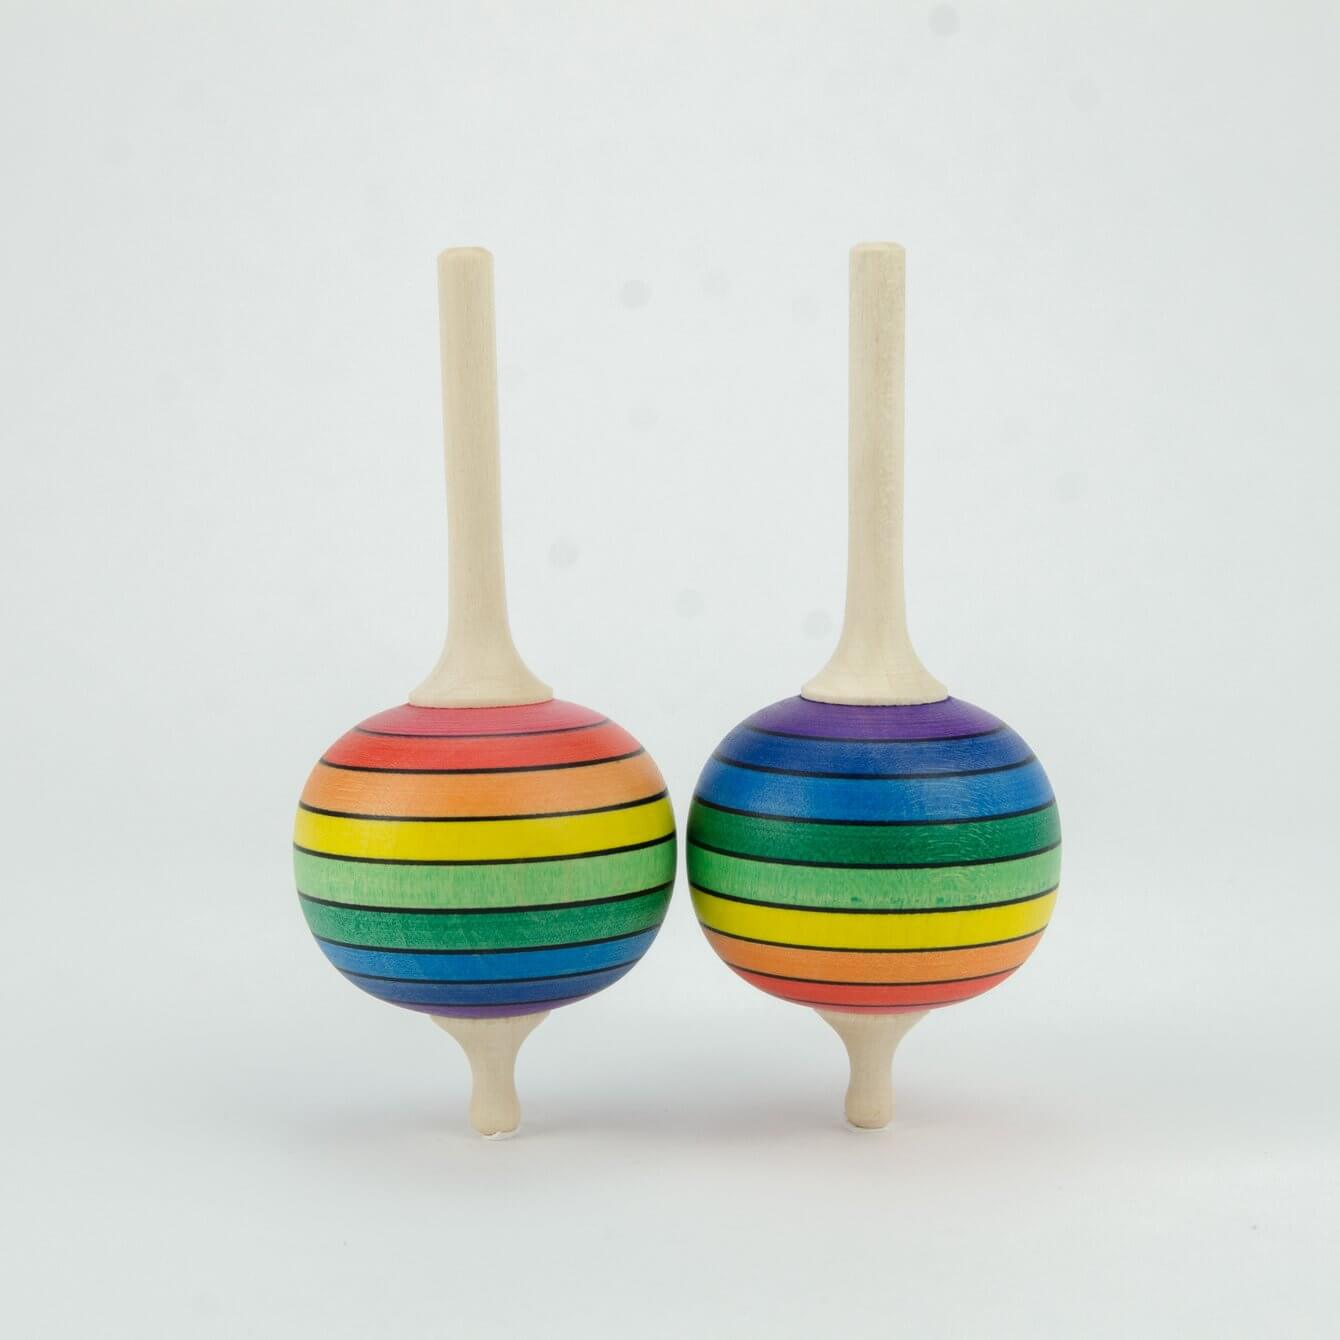 Lolly Spinning Top Rainbow